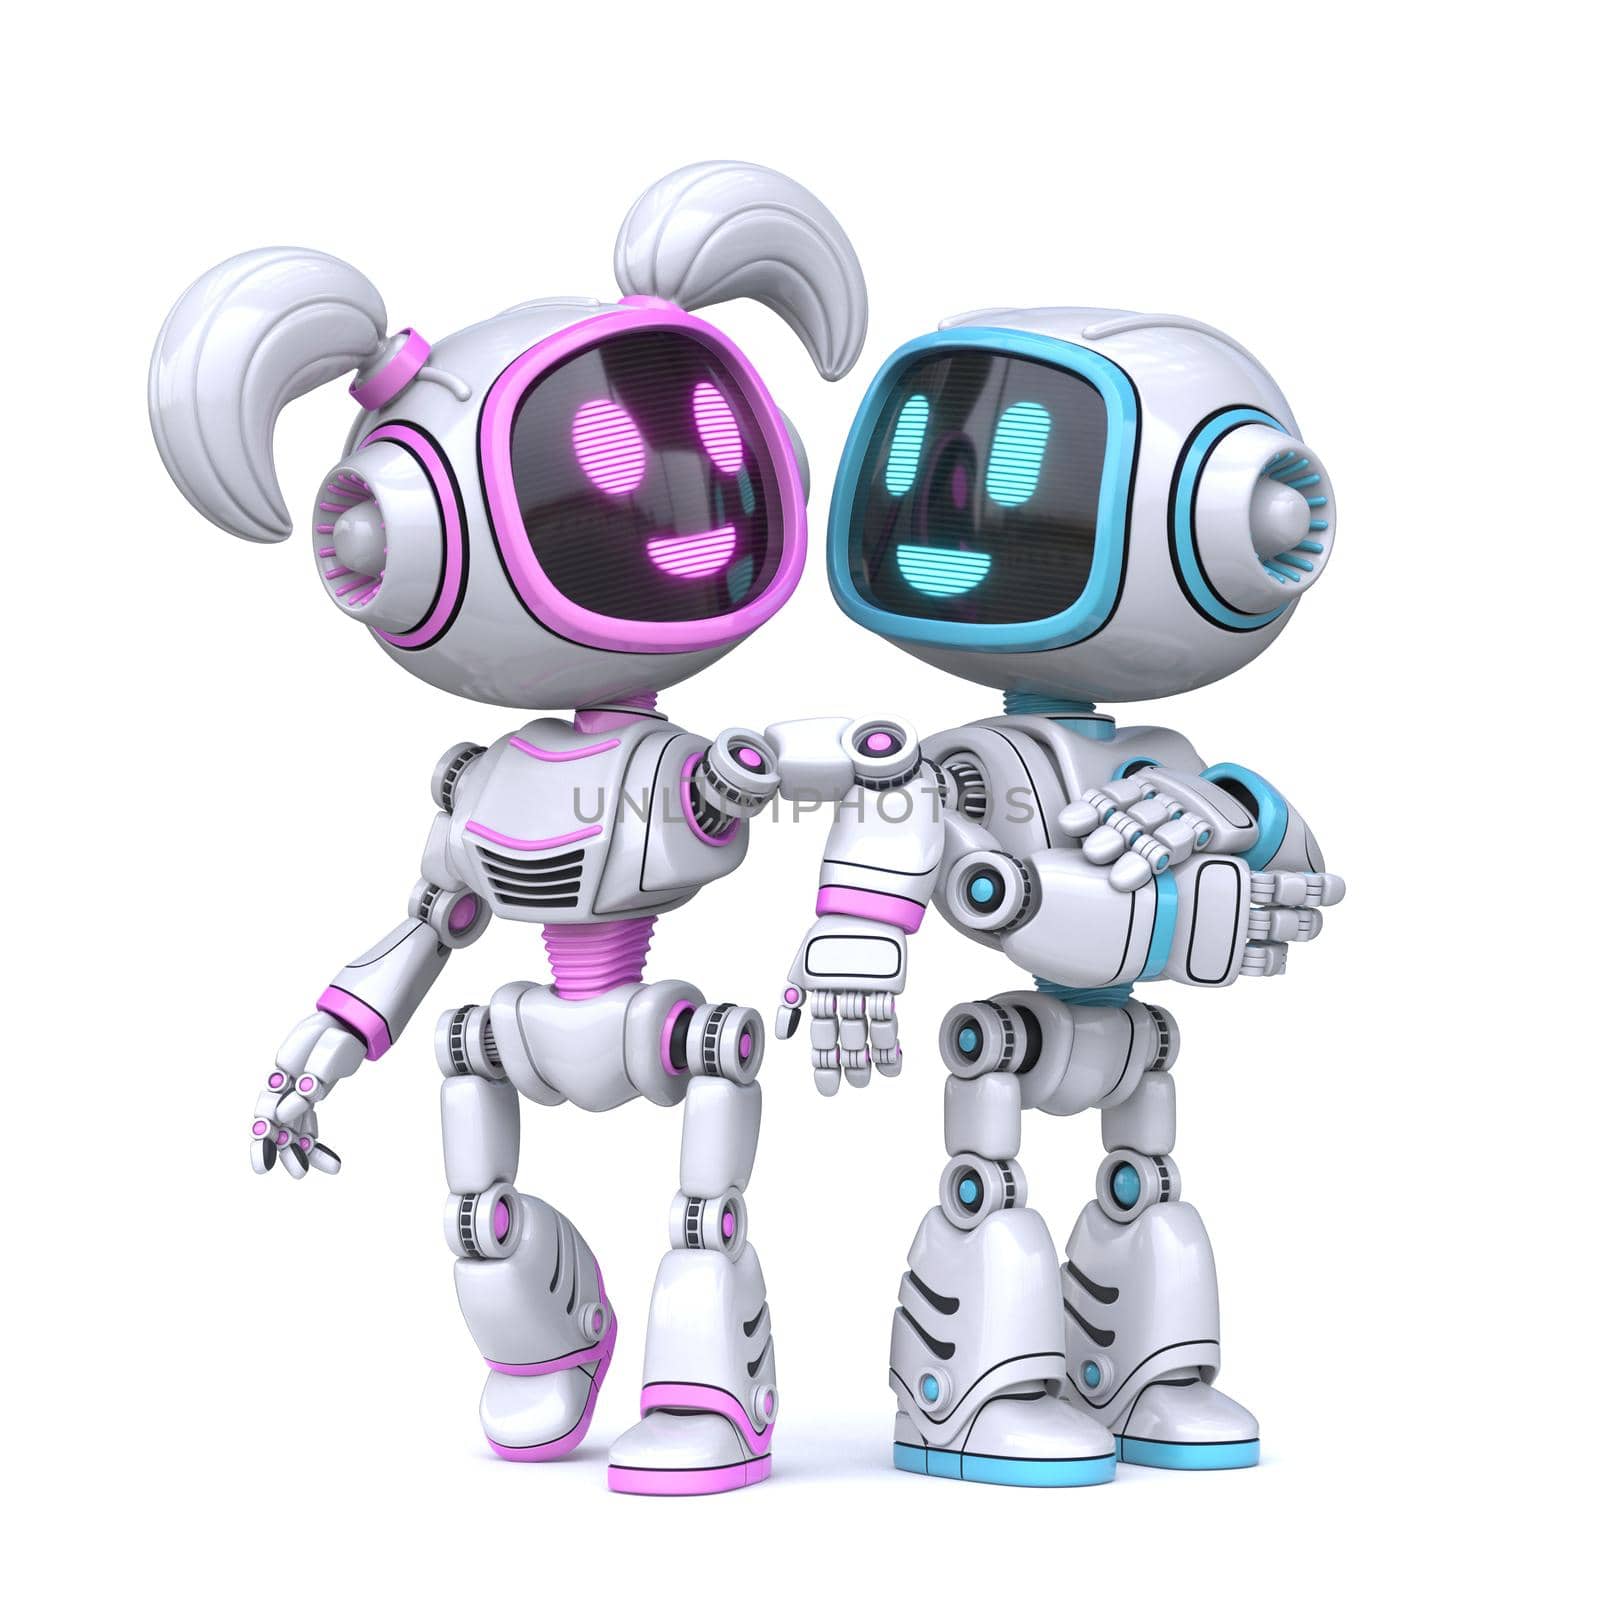 Cute pink girl and blue boy robots posing 3D rendering illustration isolated on white background